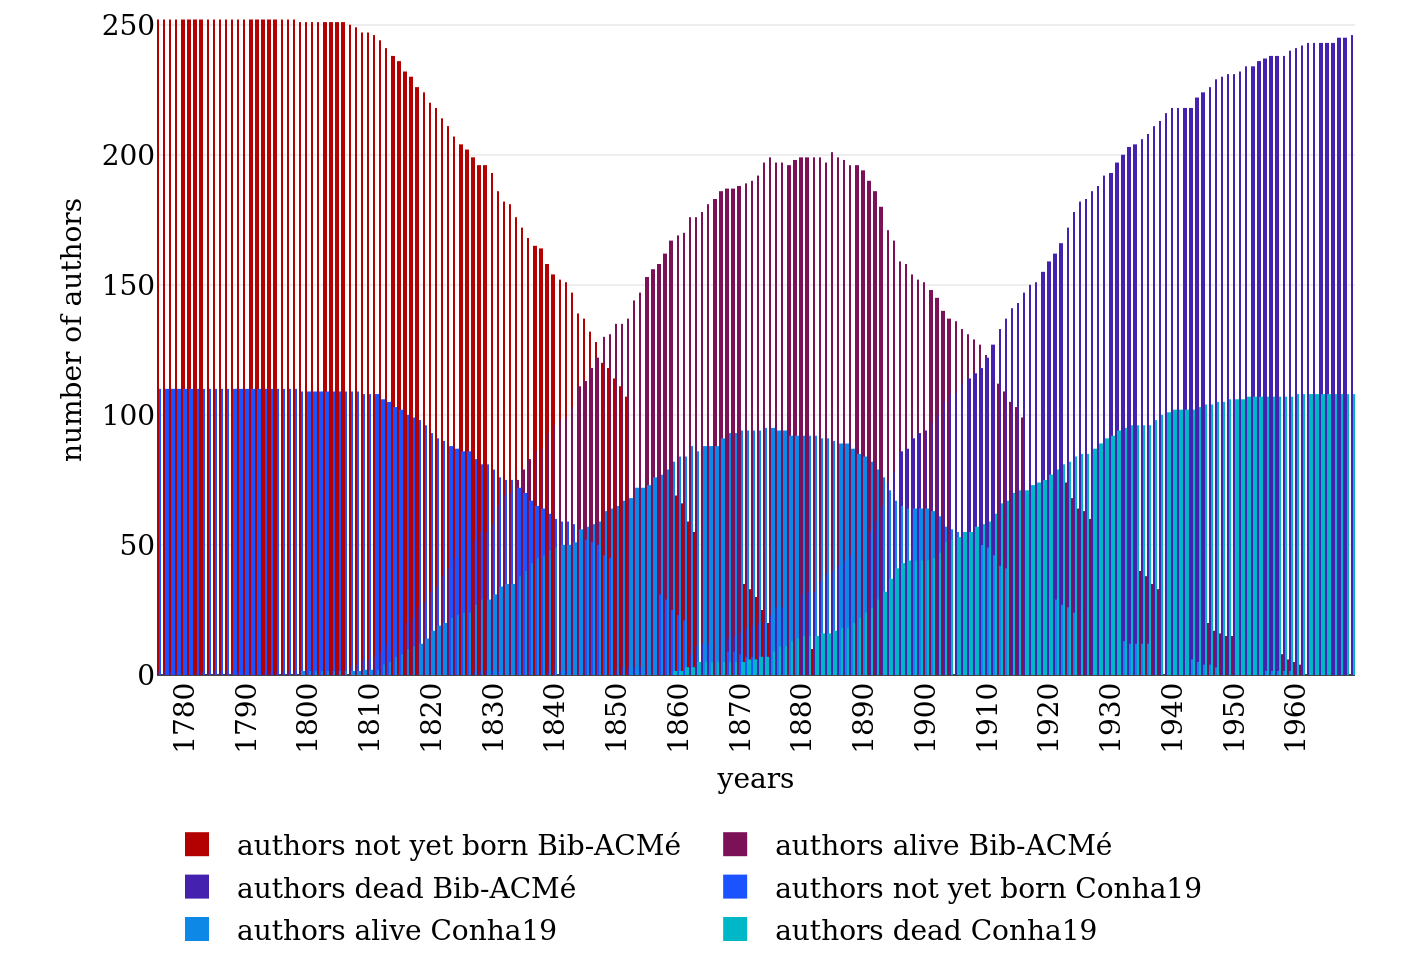 Authors alive per year.